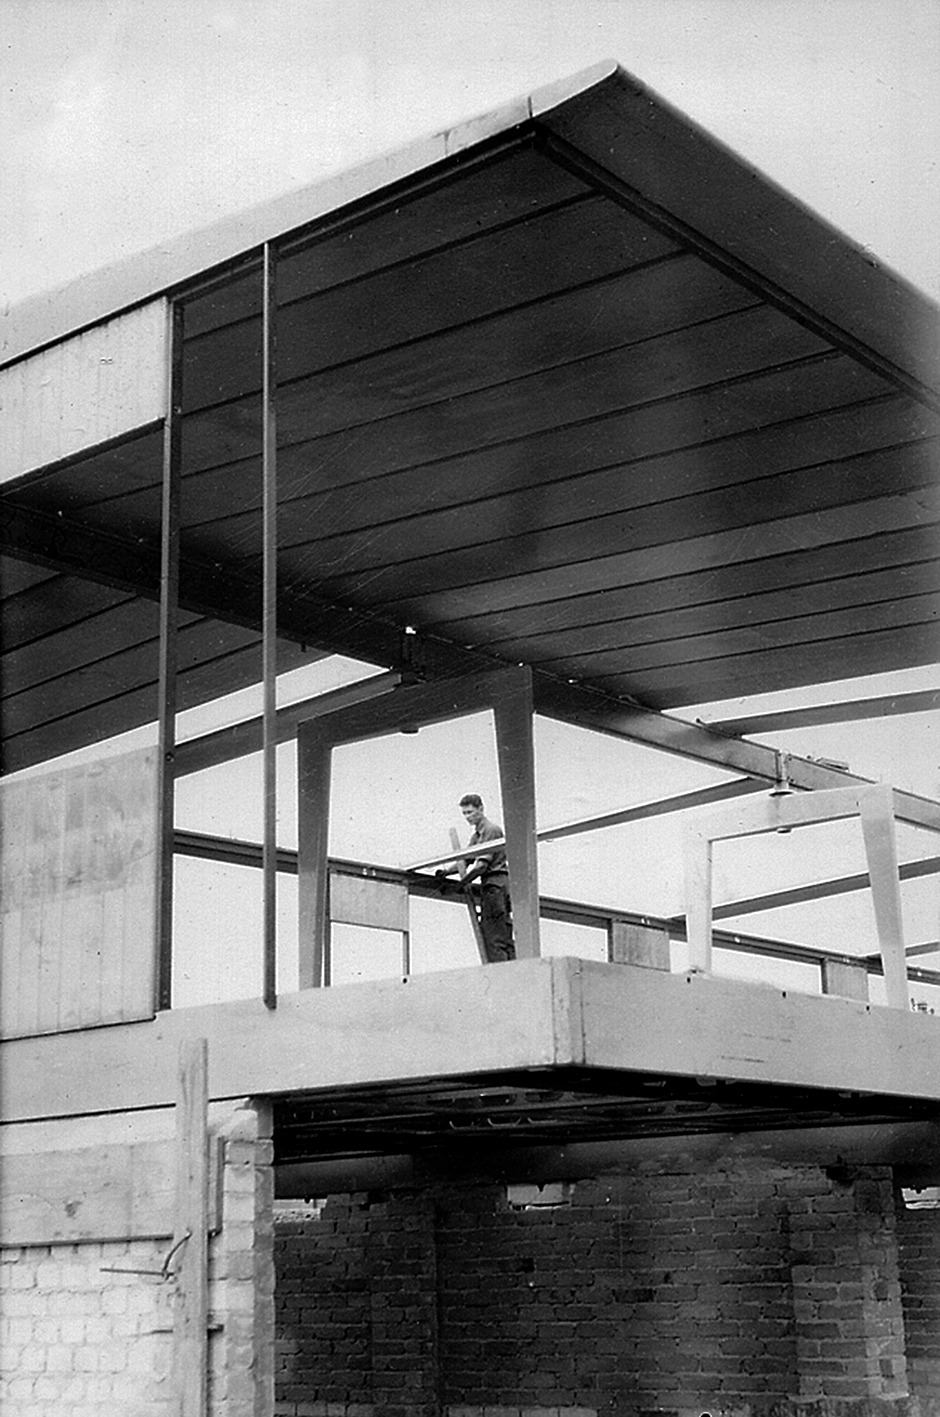 Ferembal house, Nancy. Assembling the metal frame and the steel roof, with its slabs and gutter, summer 1948.